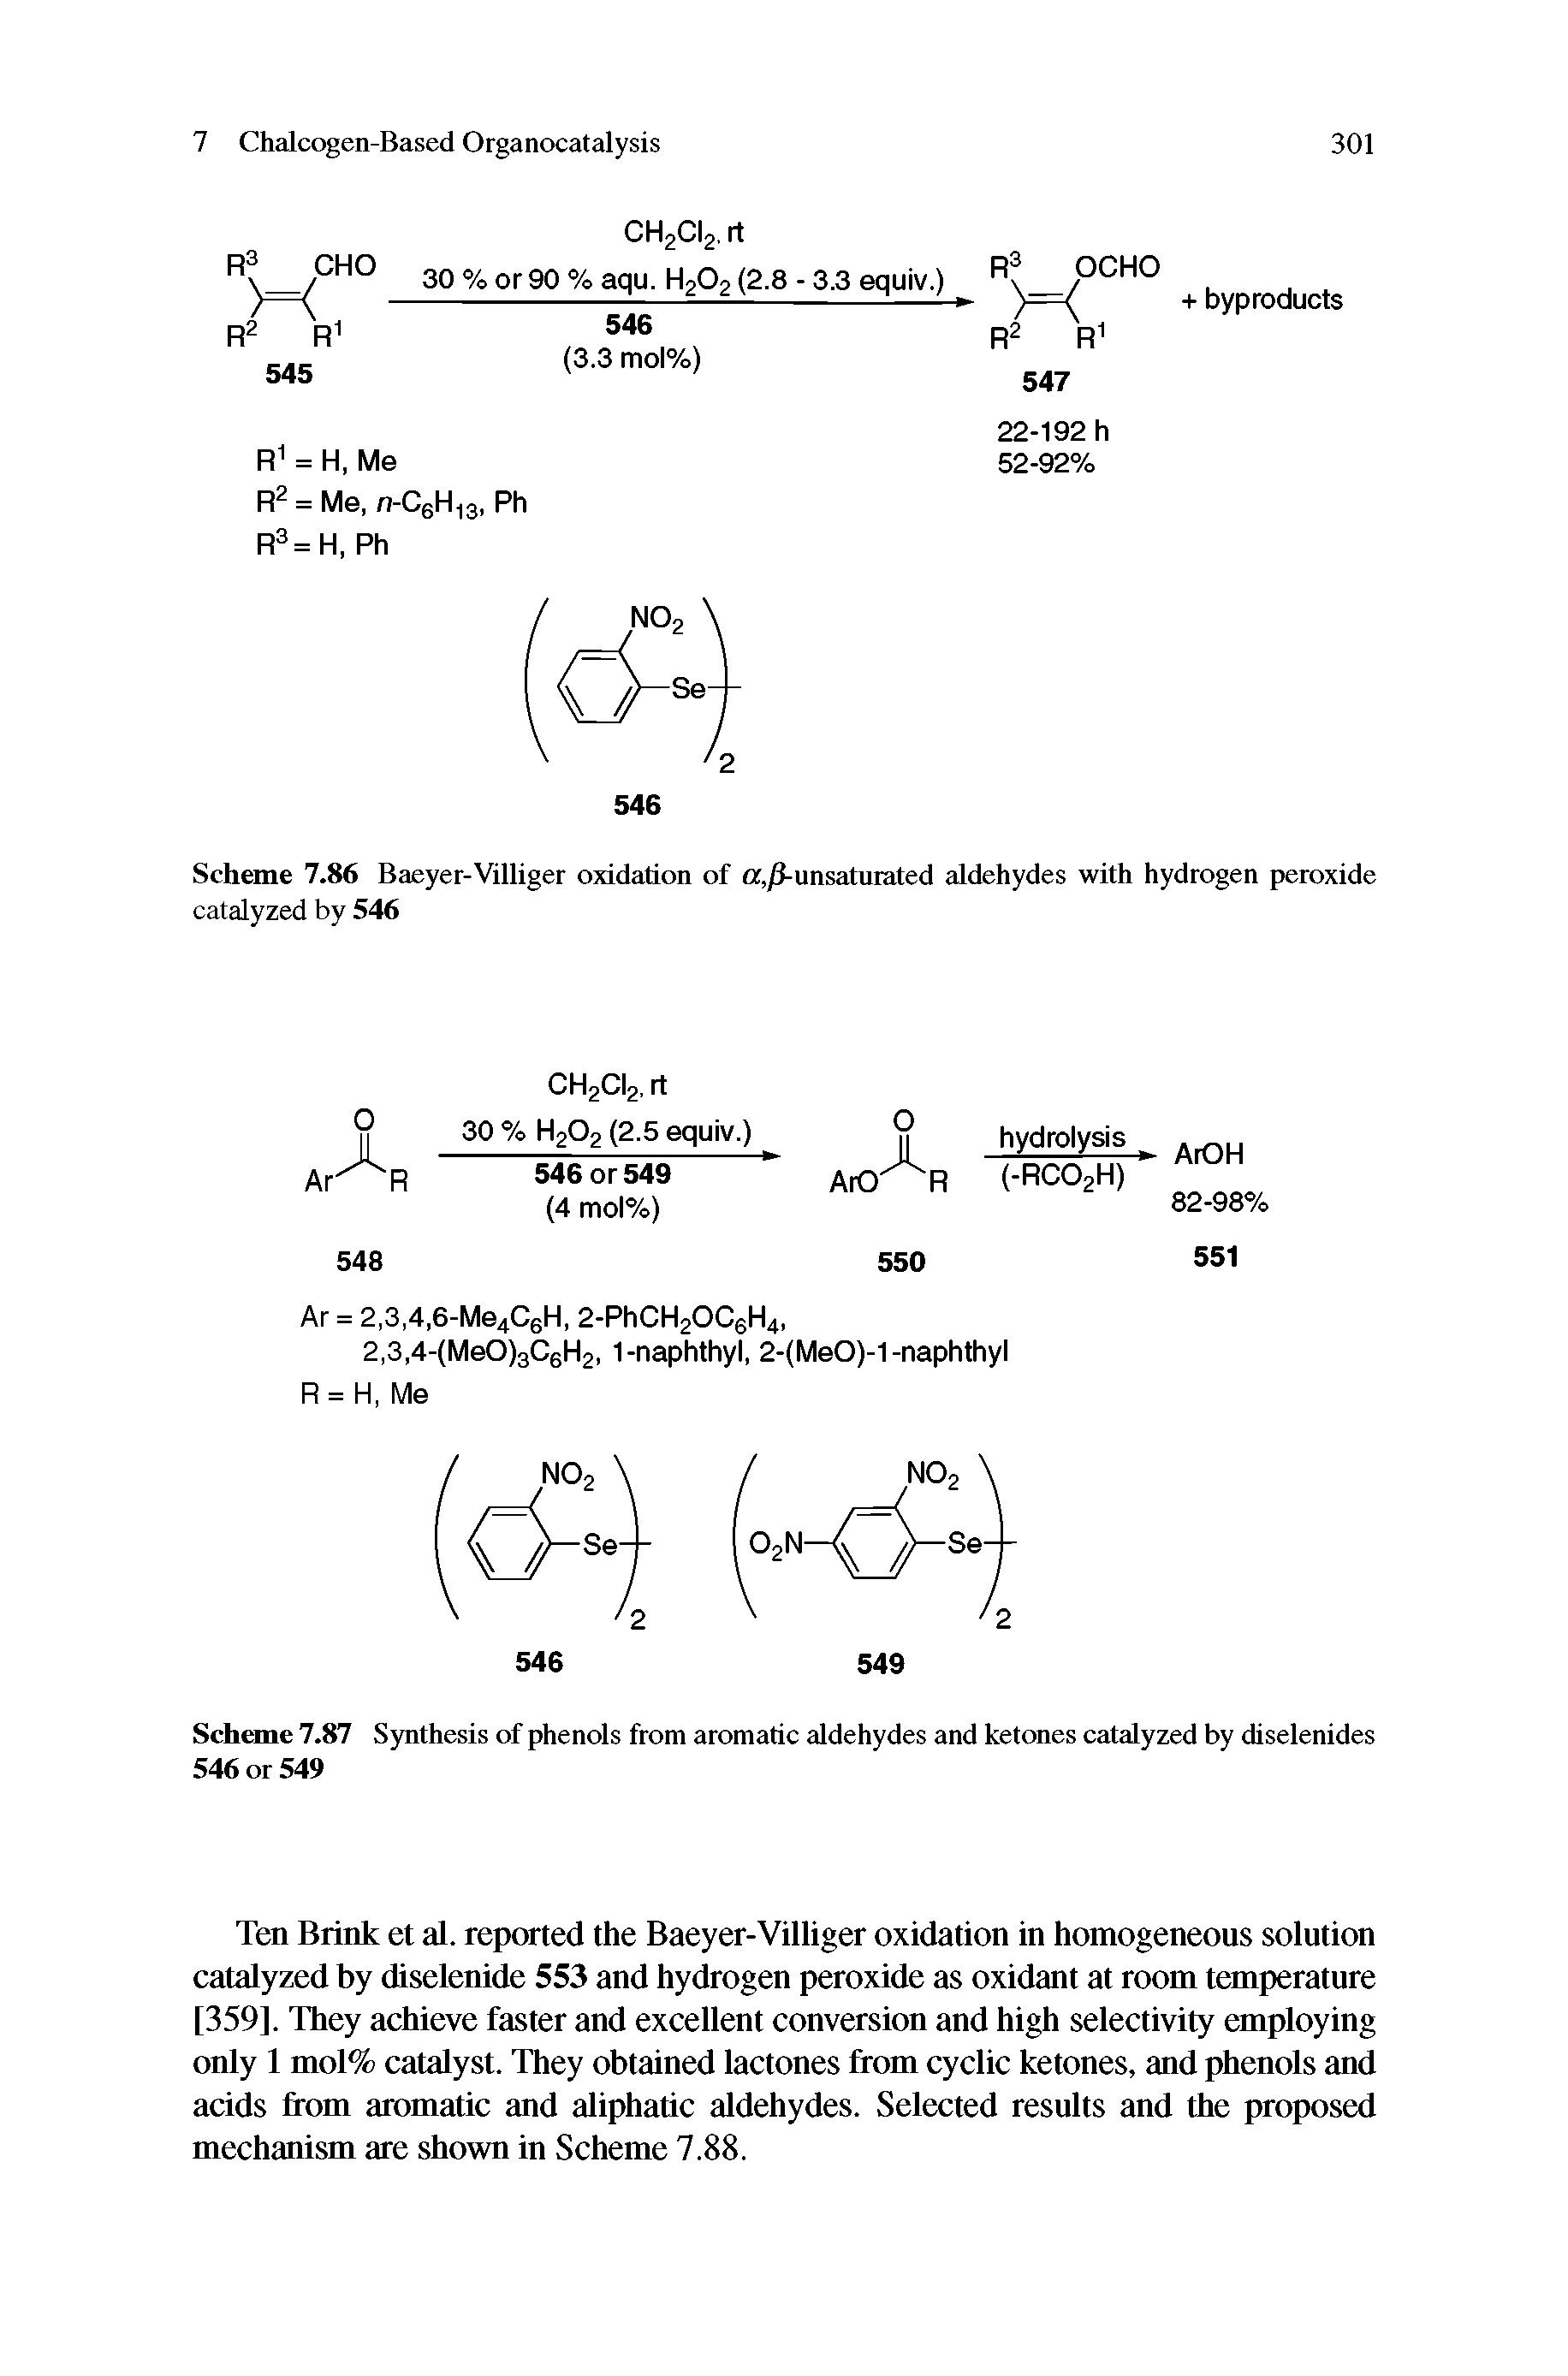 Scheme 7.86 Baeyer-Villiger oxidation of Cf,jS-unsaturated aldehydes with hydrogen peroxide catalyzed by 546...